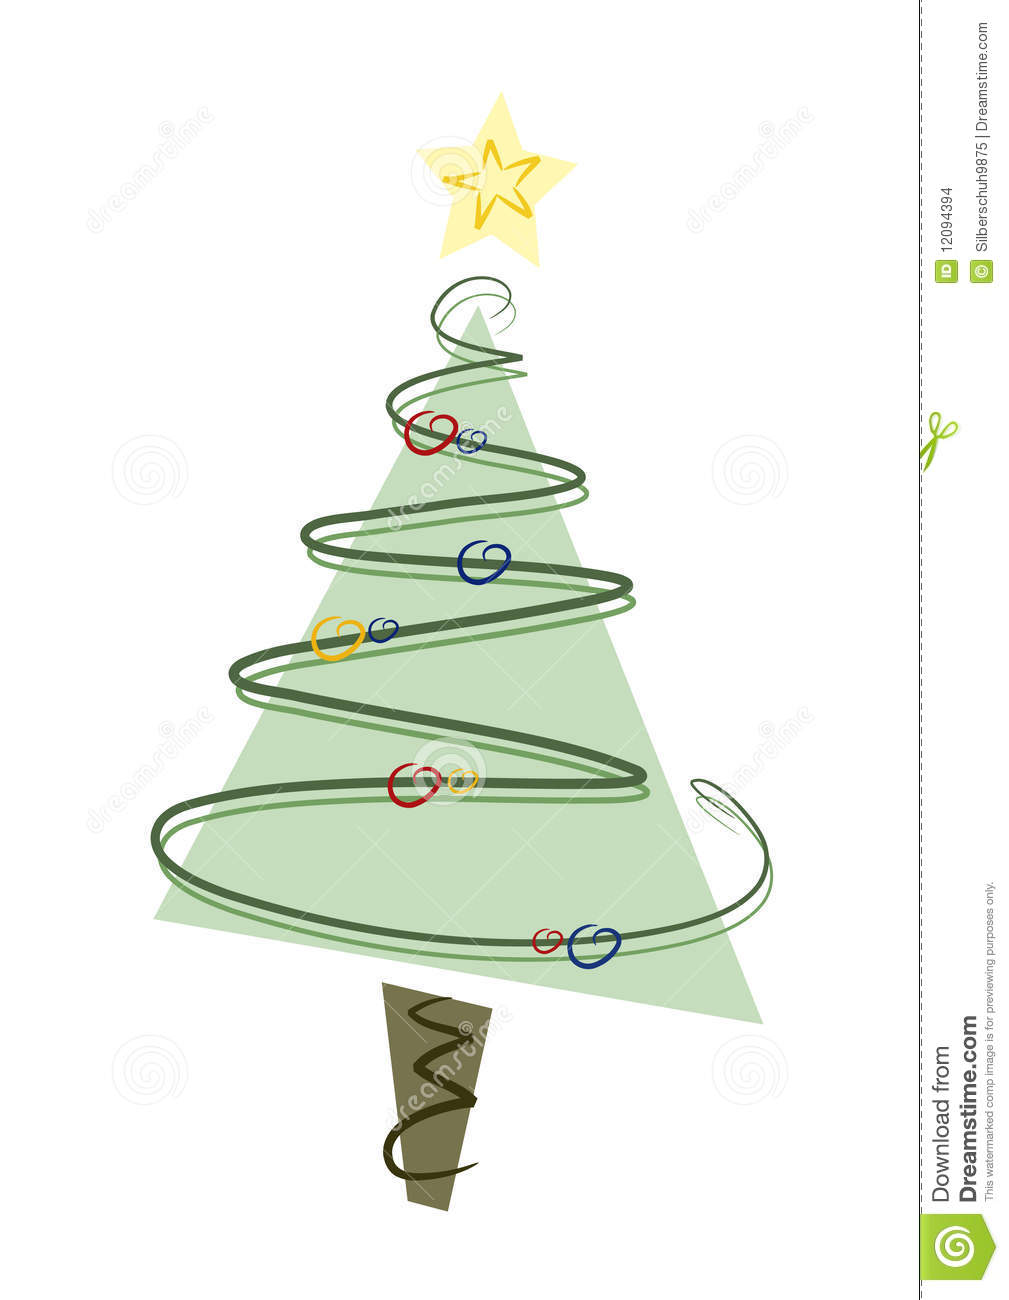 Abstract Modern Christmas Tree With Ornaments And Star